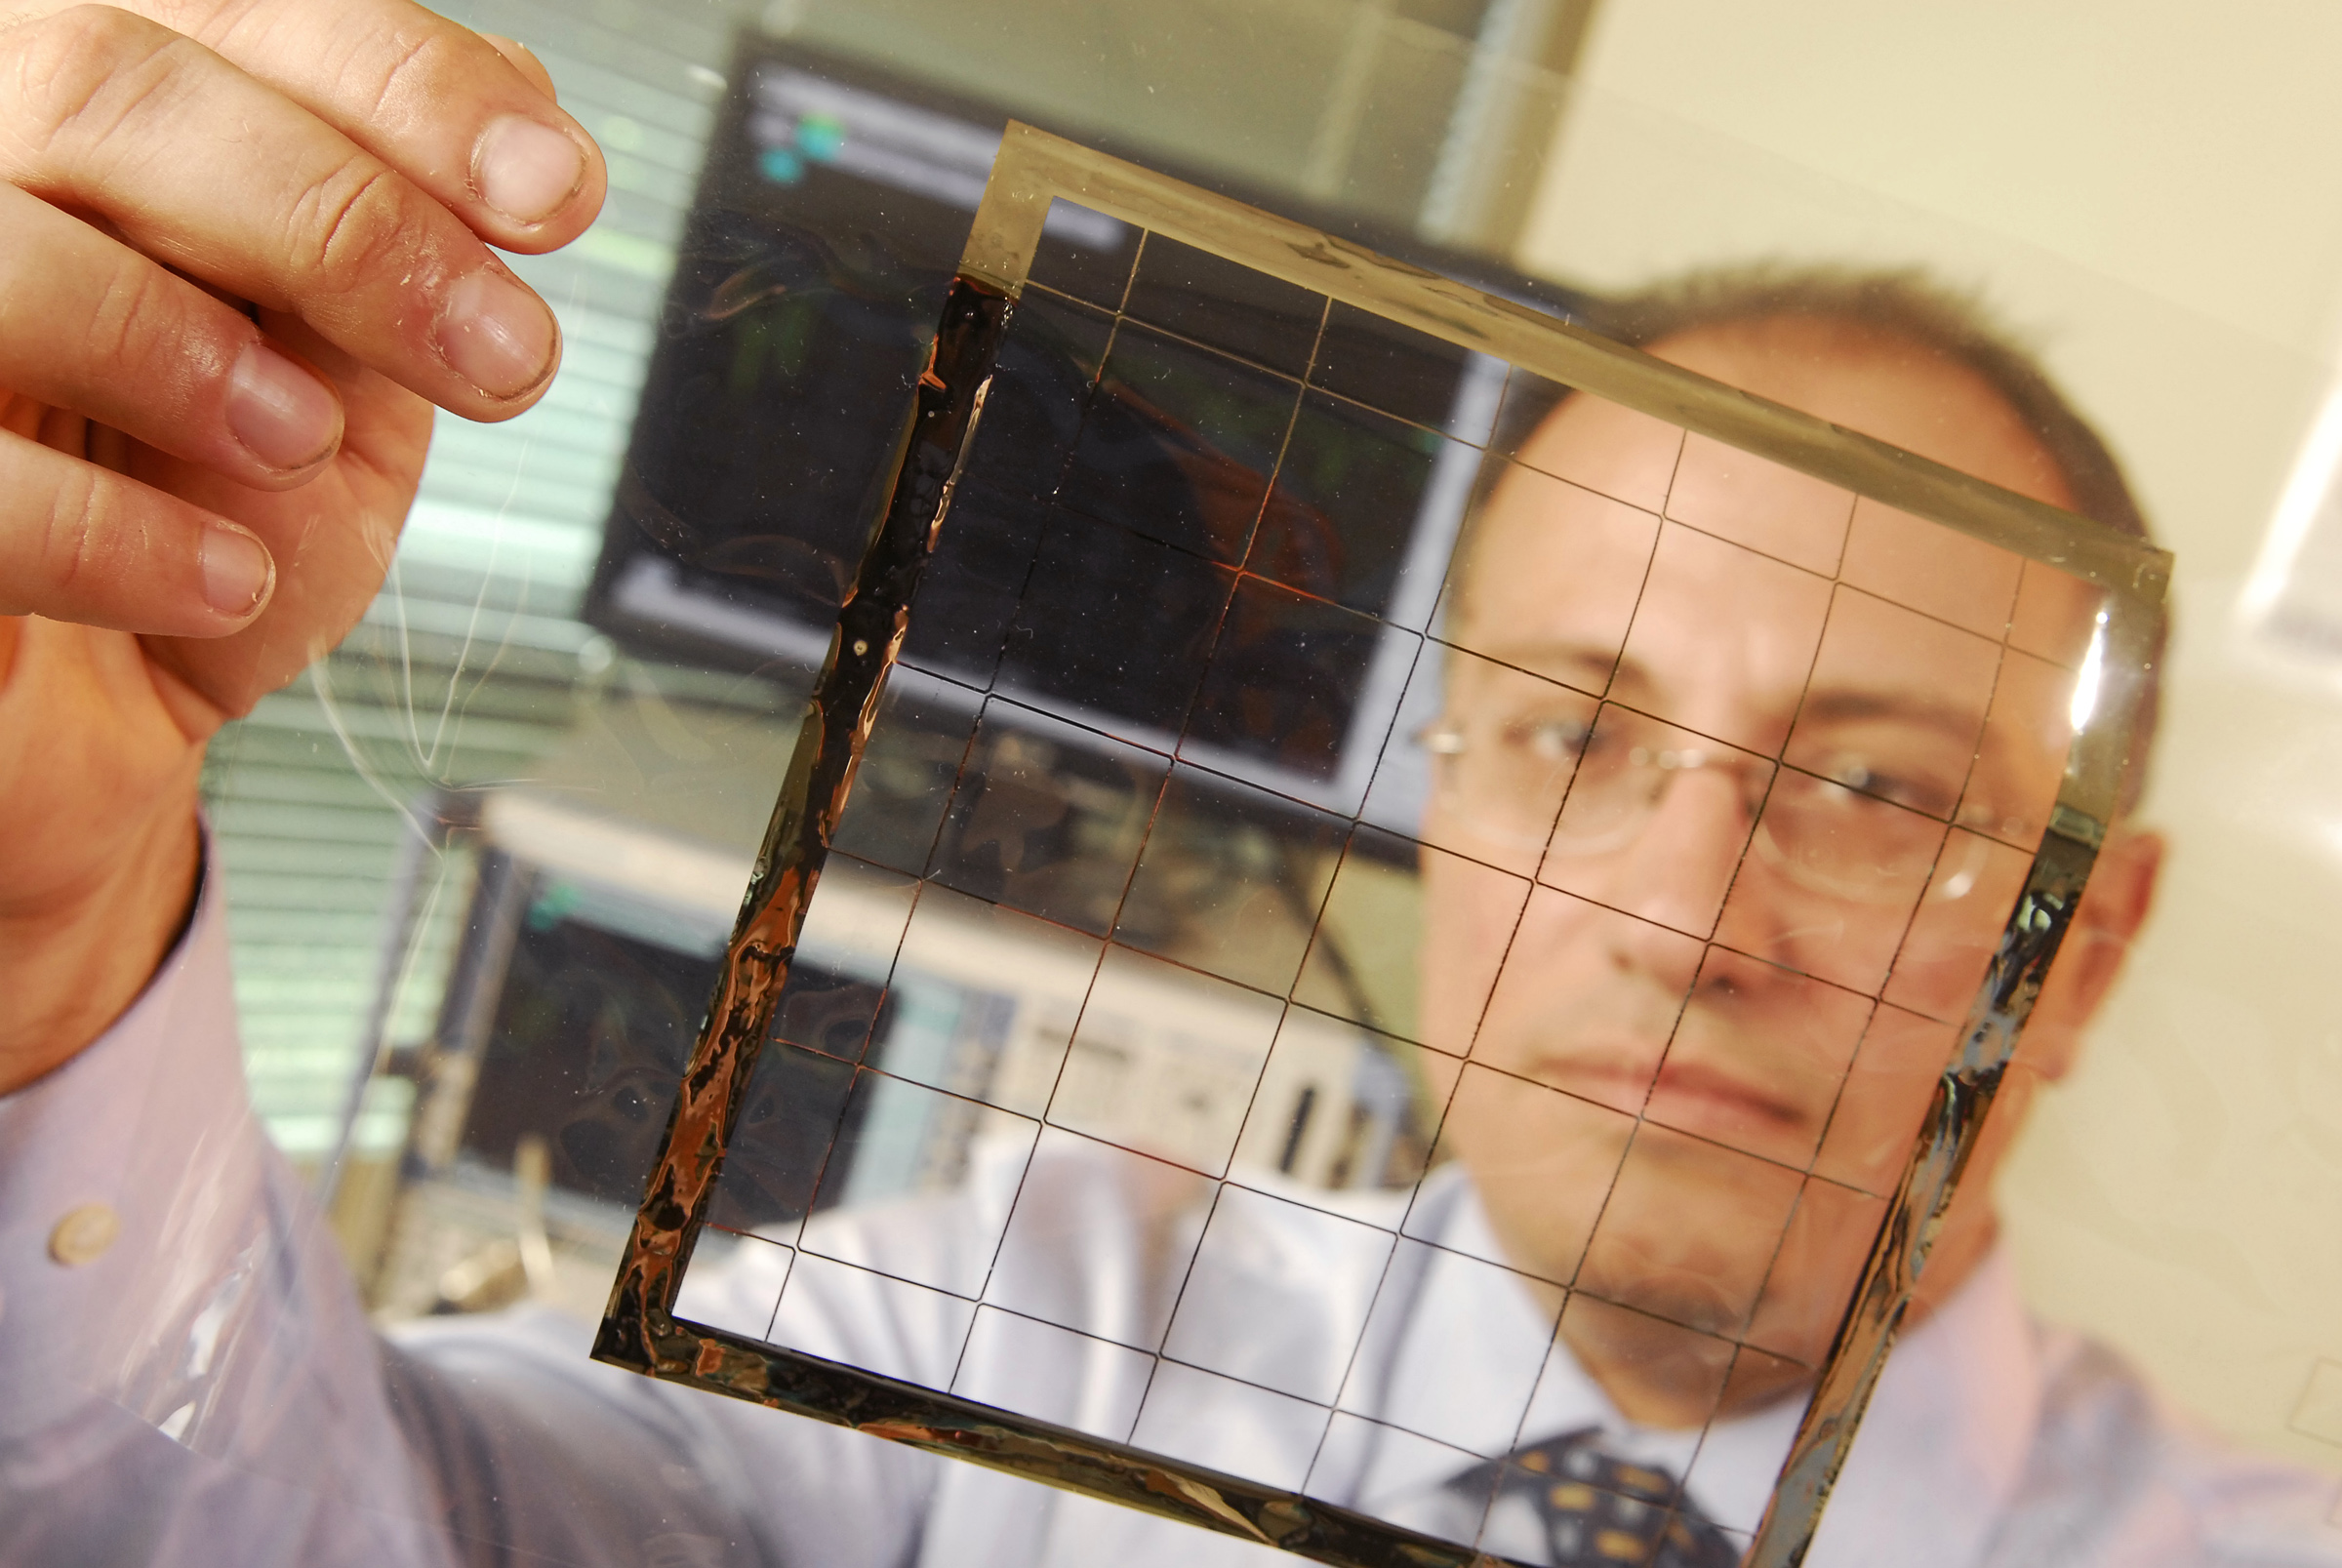 New Printable Antenna Can Harvest Ambient Energy To Power Small Electronics